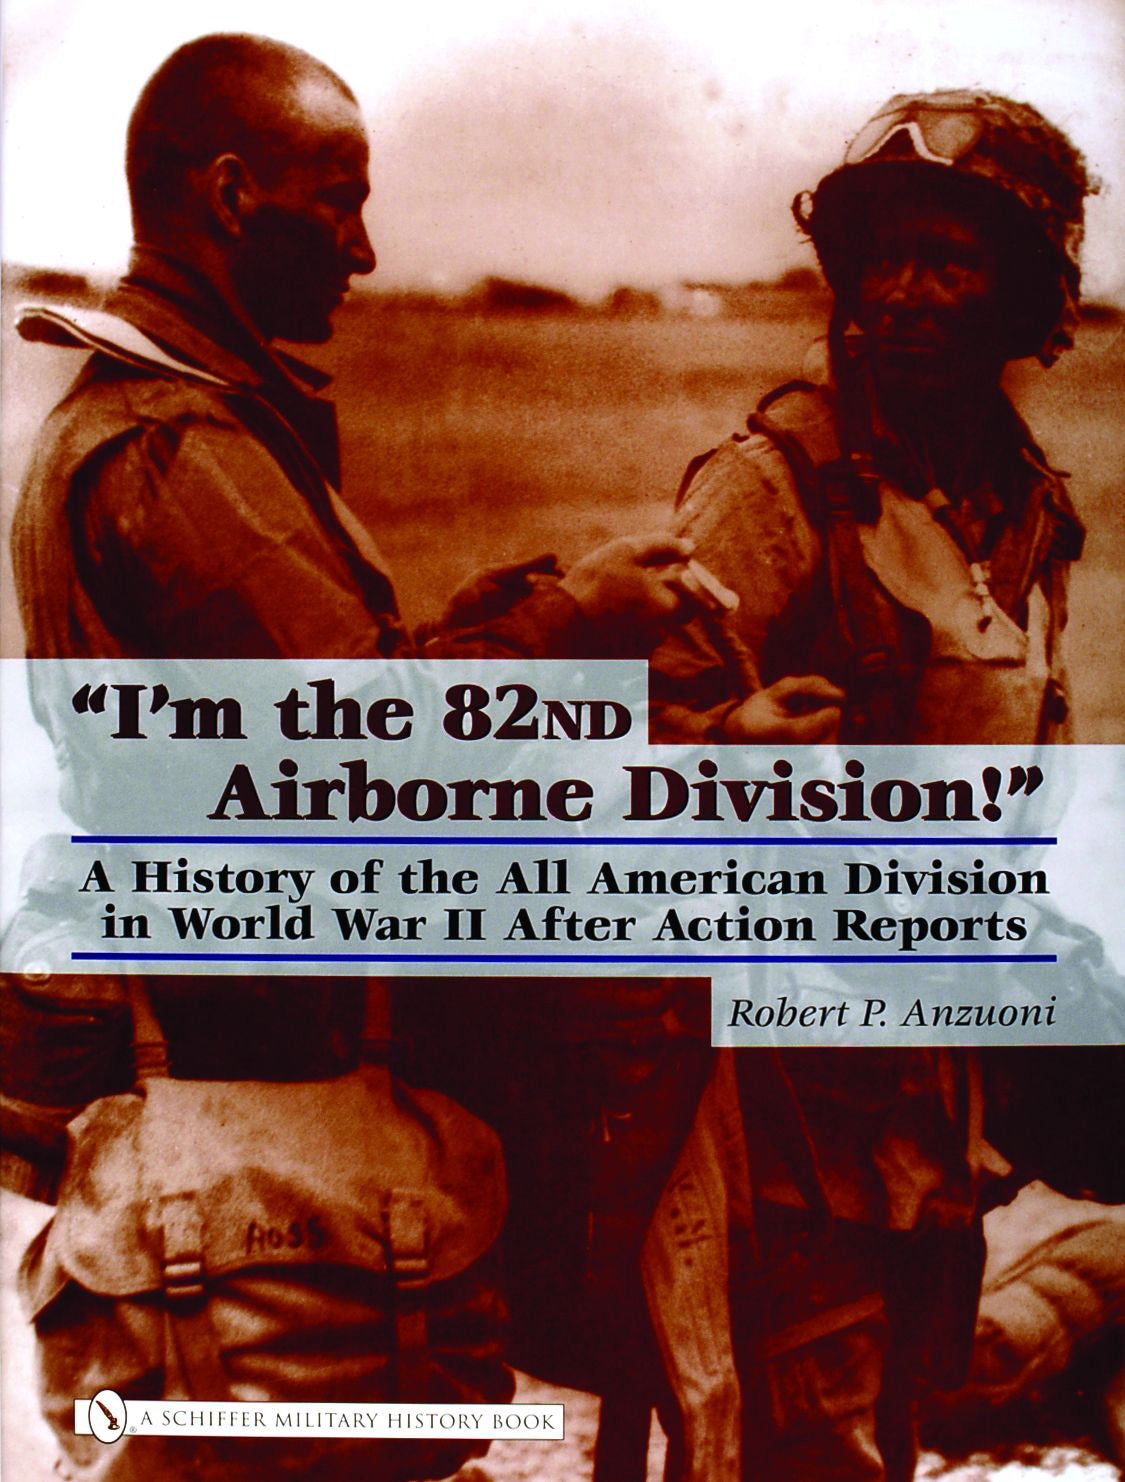 "I'm with the 82nd Airborne Division!"